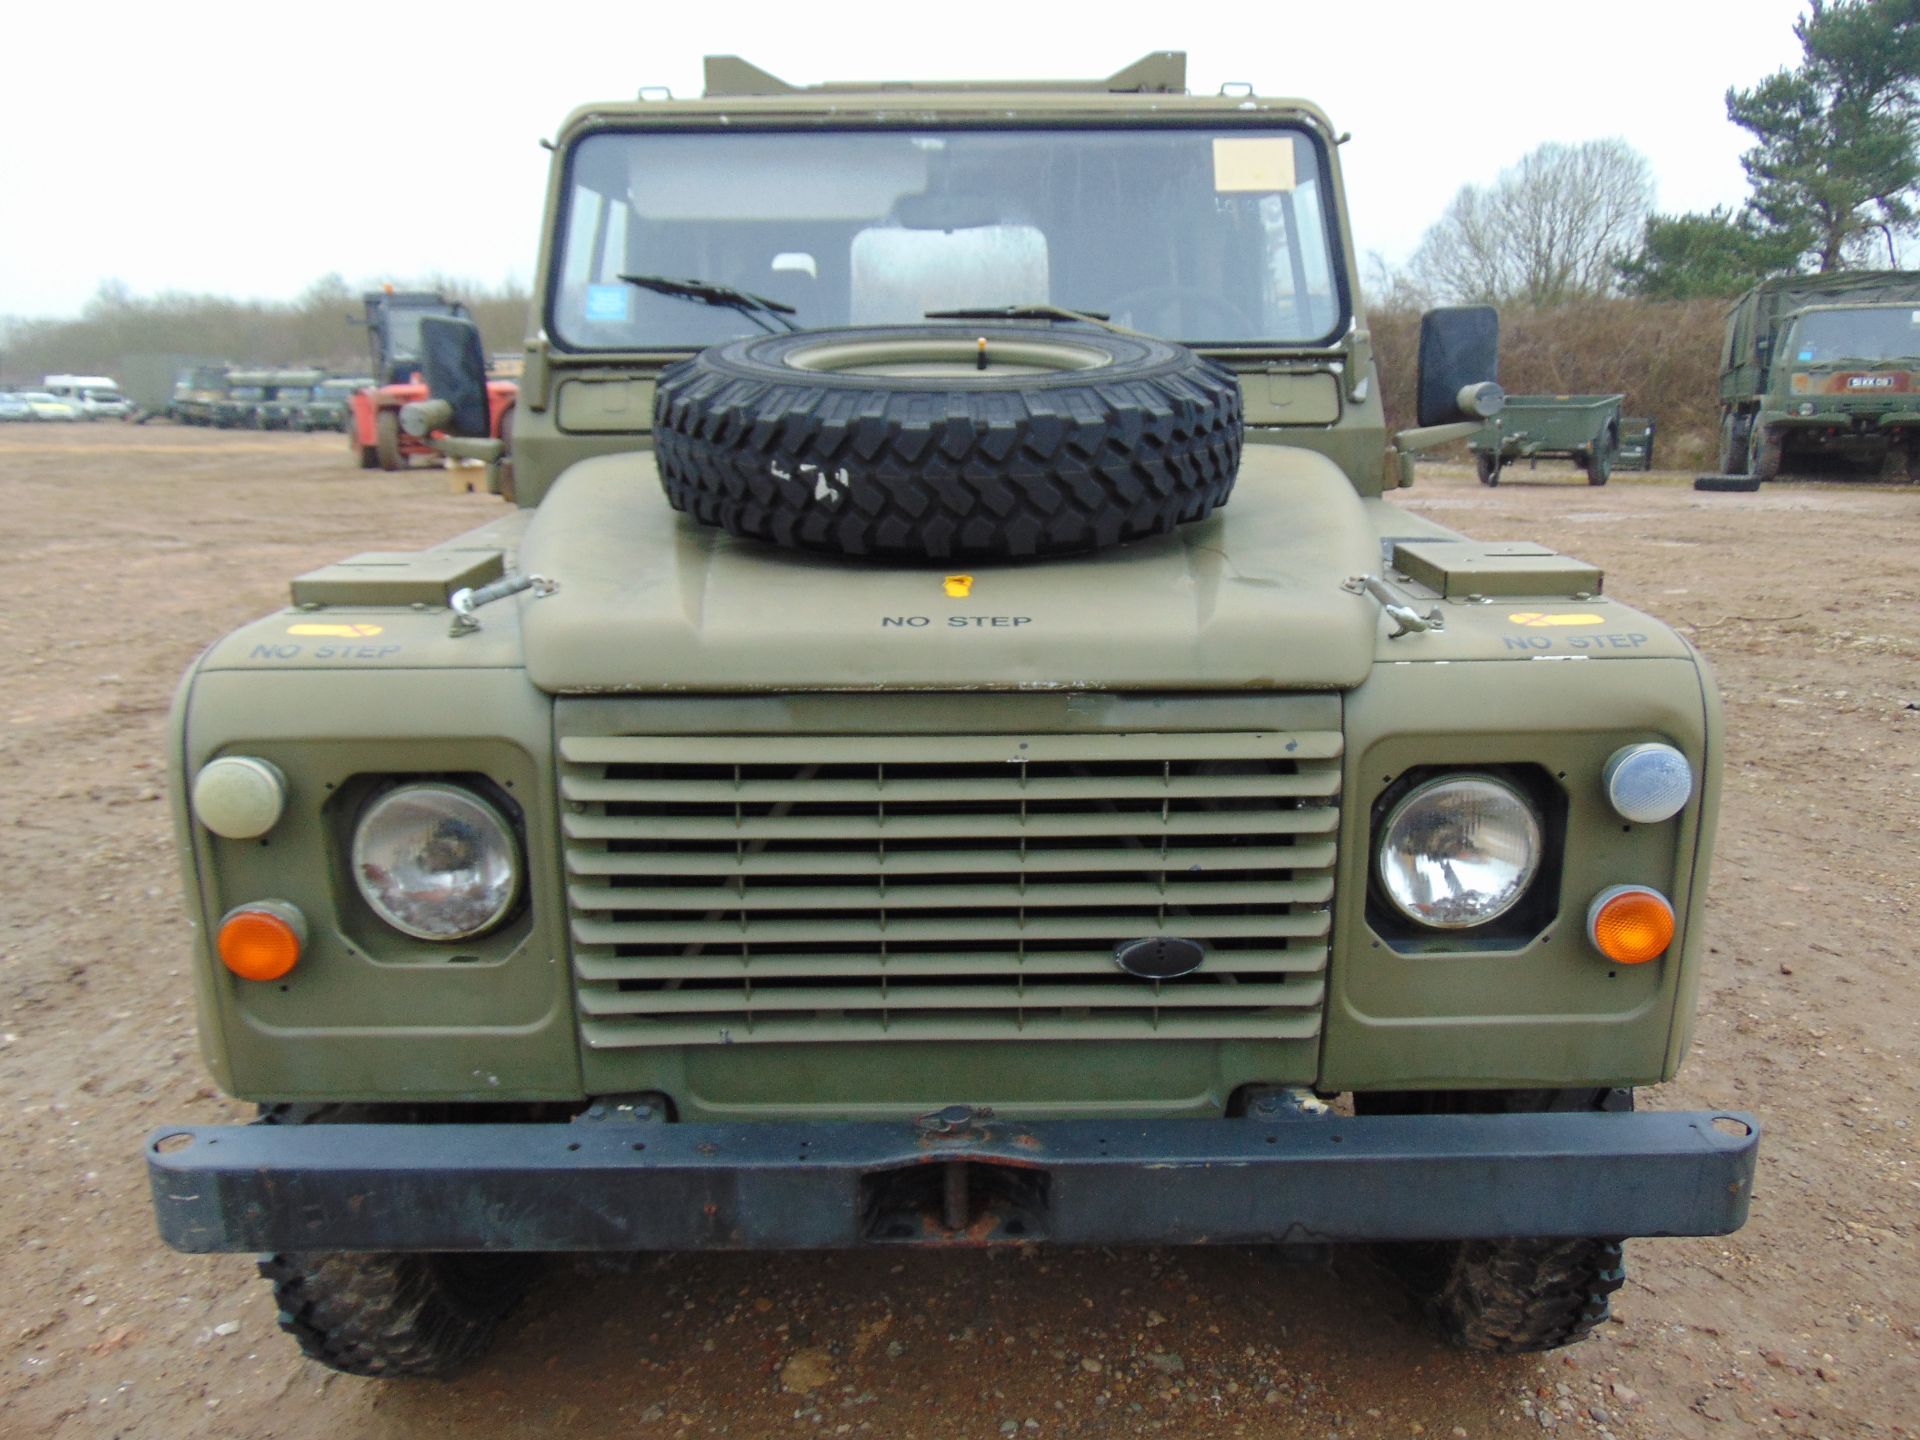 Ultra Rare Helisupport Land Rover 110 Hard Top - Image 2 of 23